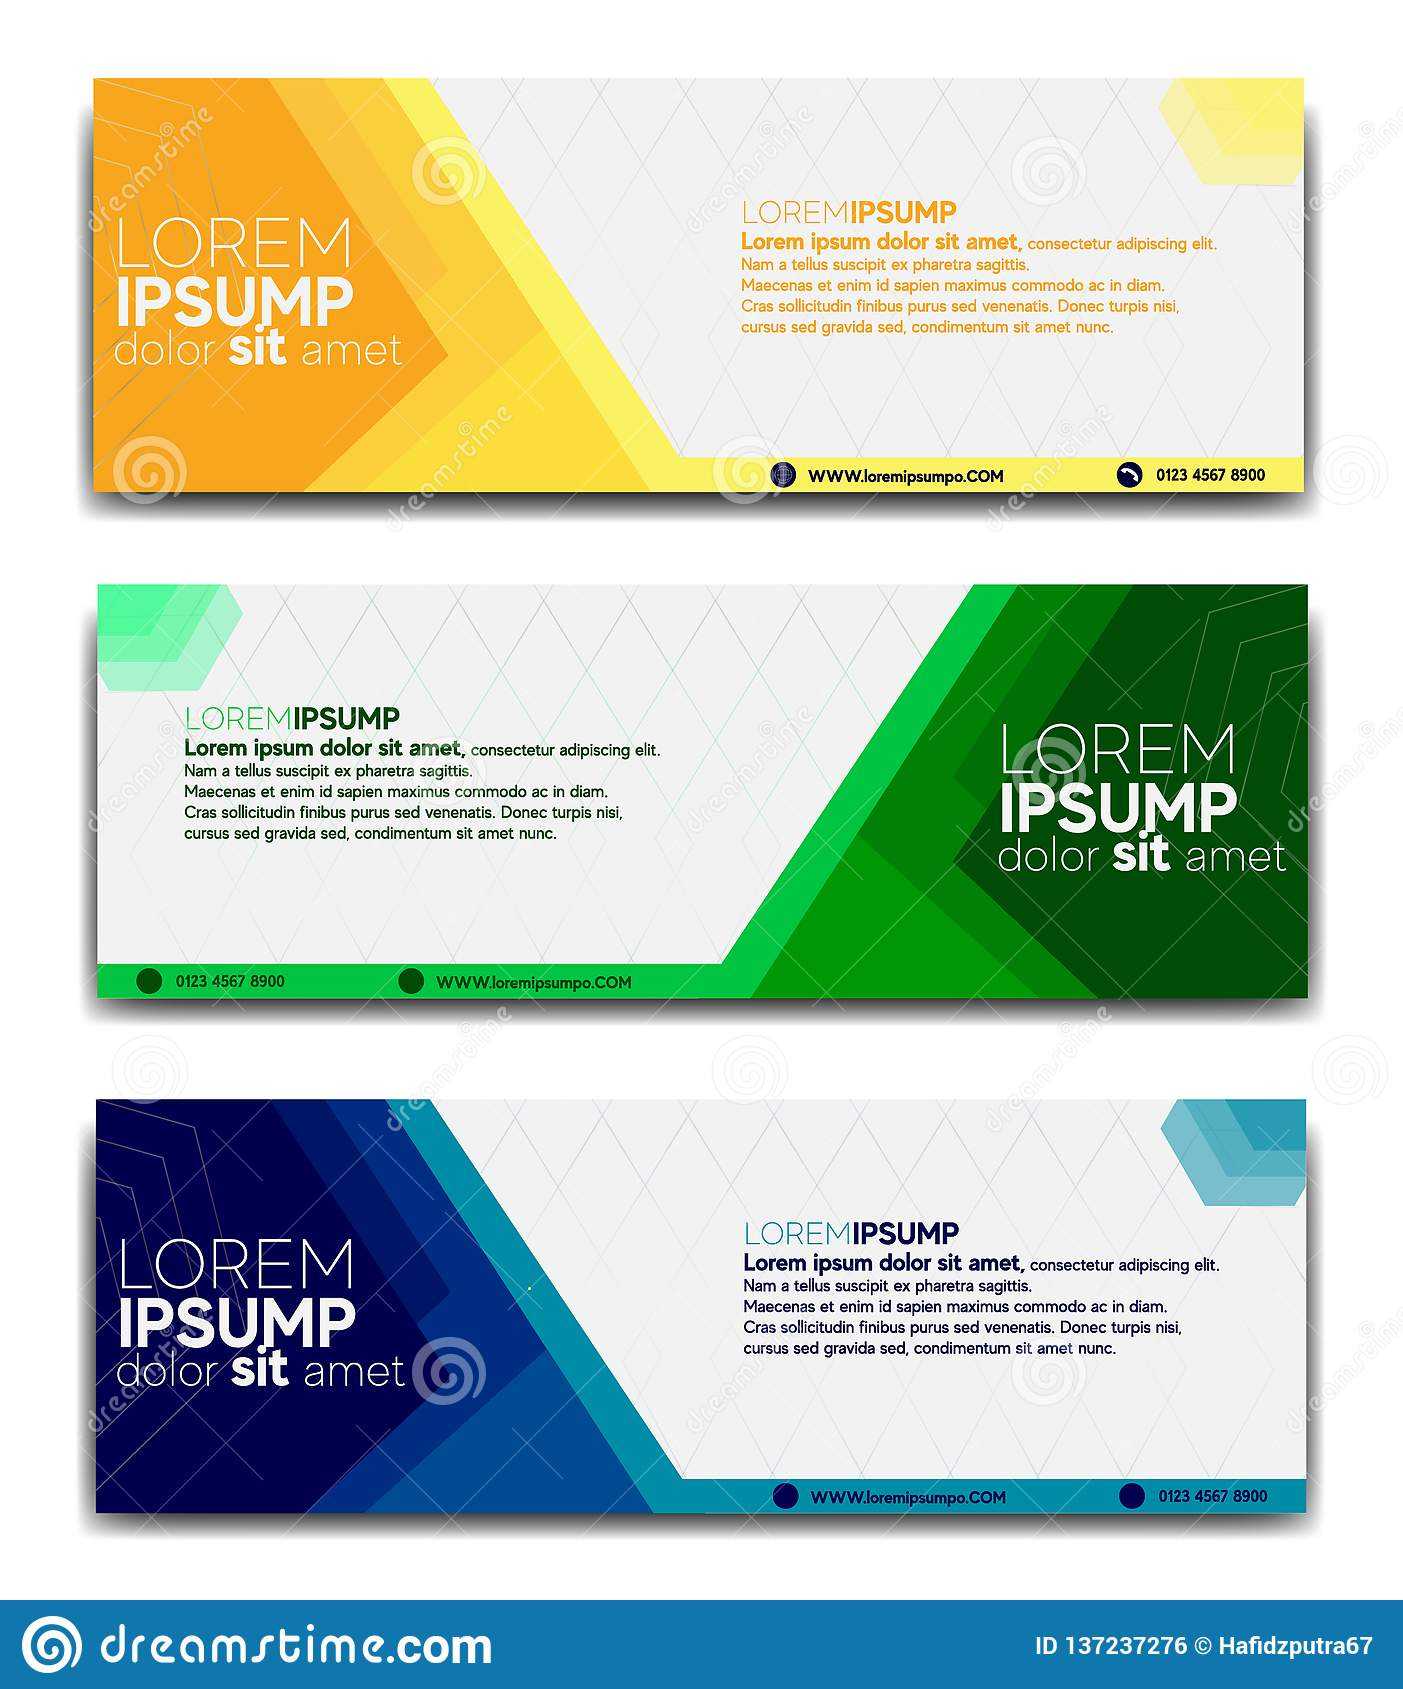 Promotional Banner Design Template 2019 Stock Vector Throughout Website Banner Design Templates